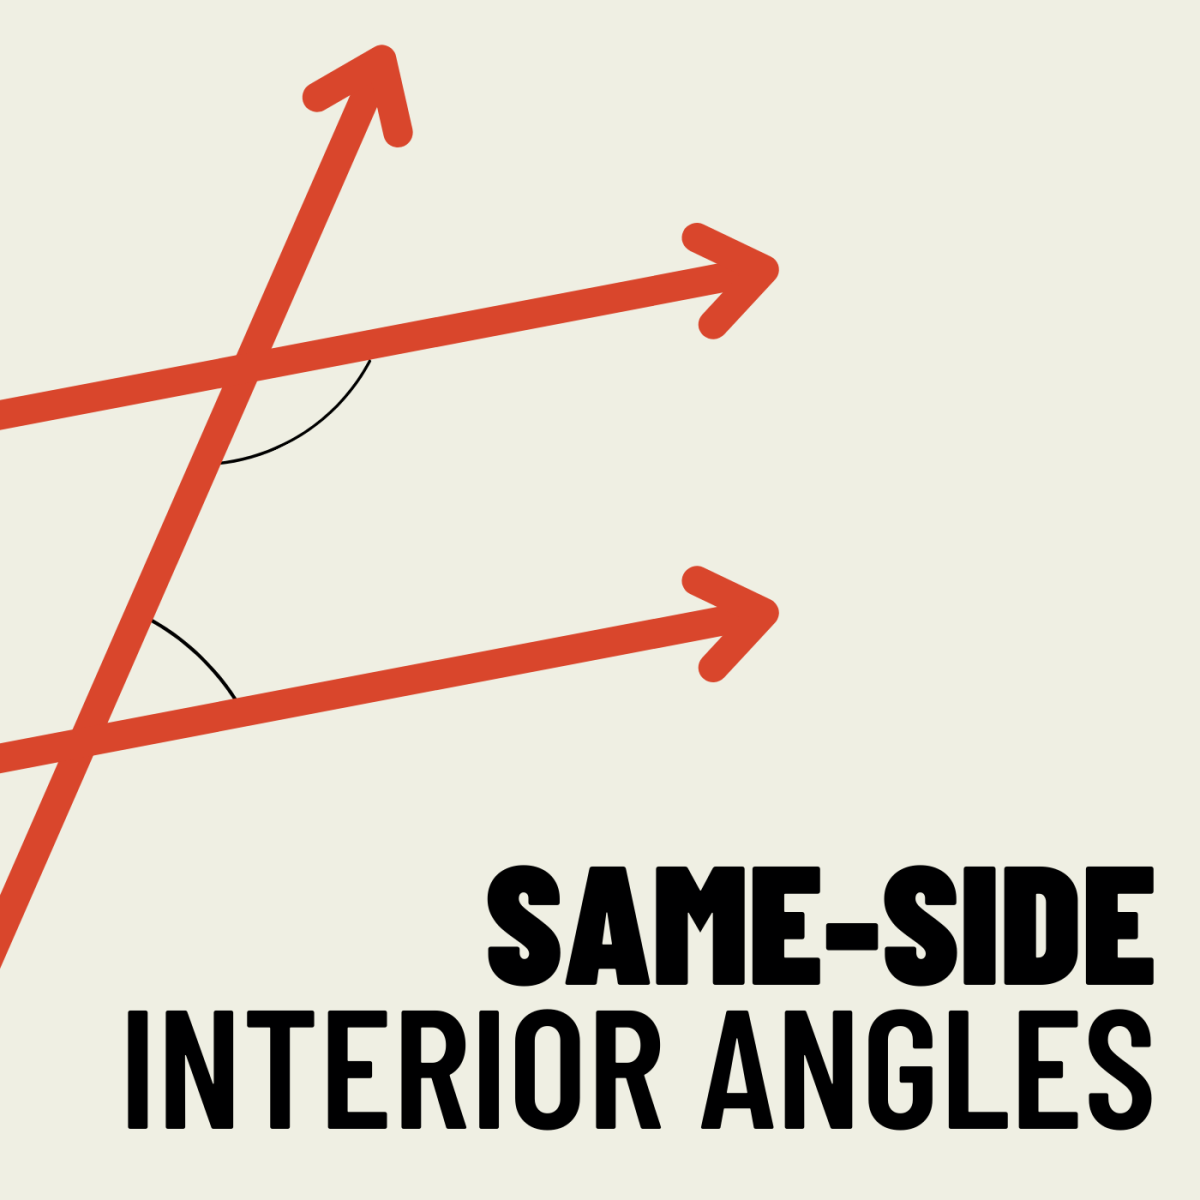 Same-Side Interior Angles: Theorem, Proof, and Examples